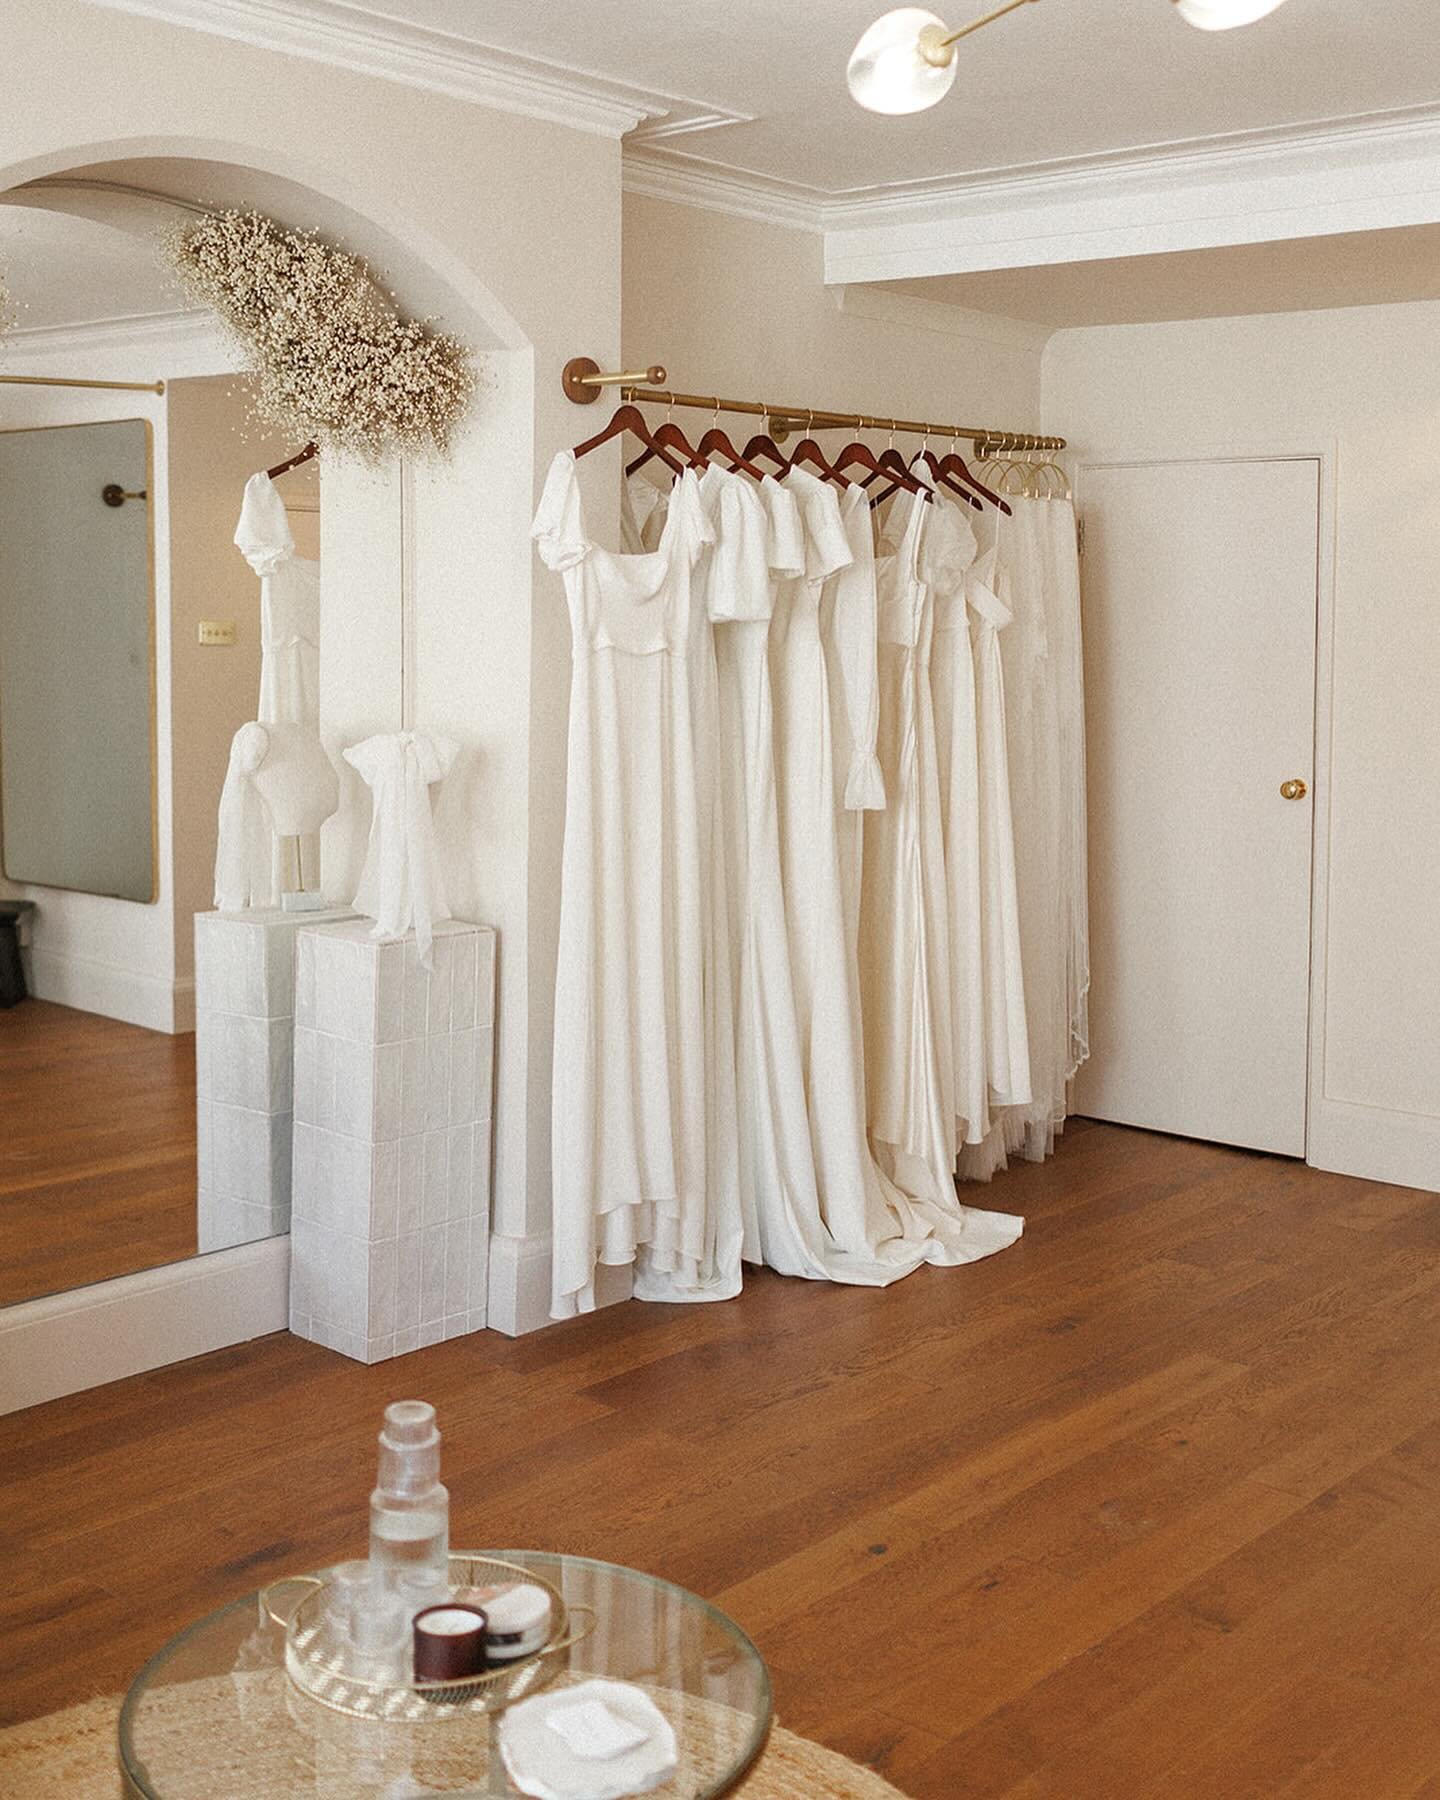 The Briderie is a destination for the modern bride ~ celebrating new wave bridal fashion.
~
Our space is always relaxed + welcoming.  During a fitting with the Briderie, you can be your genuine self, comfortable in your surroundings and allow yoursel